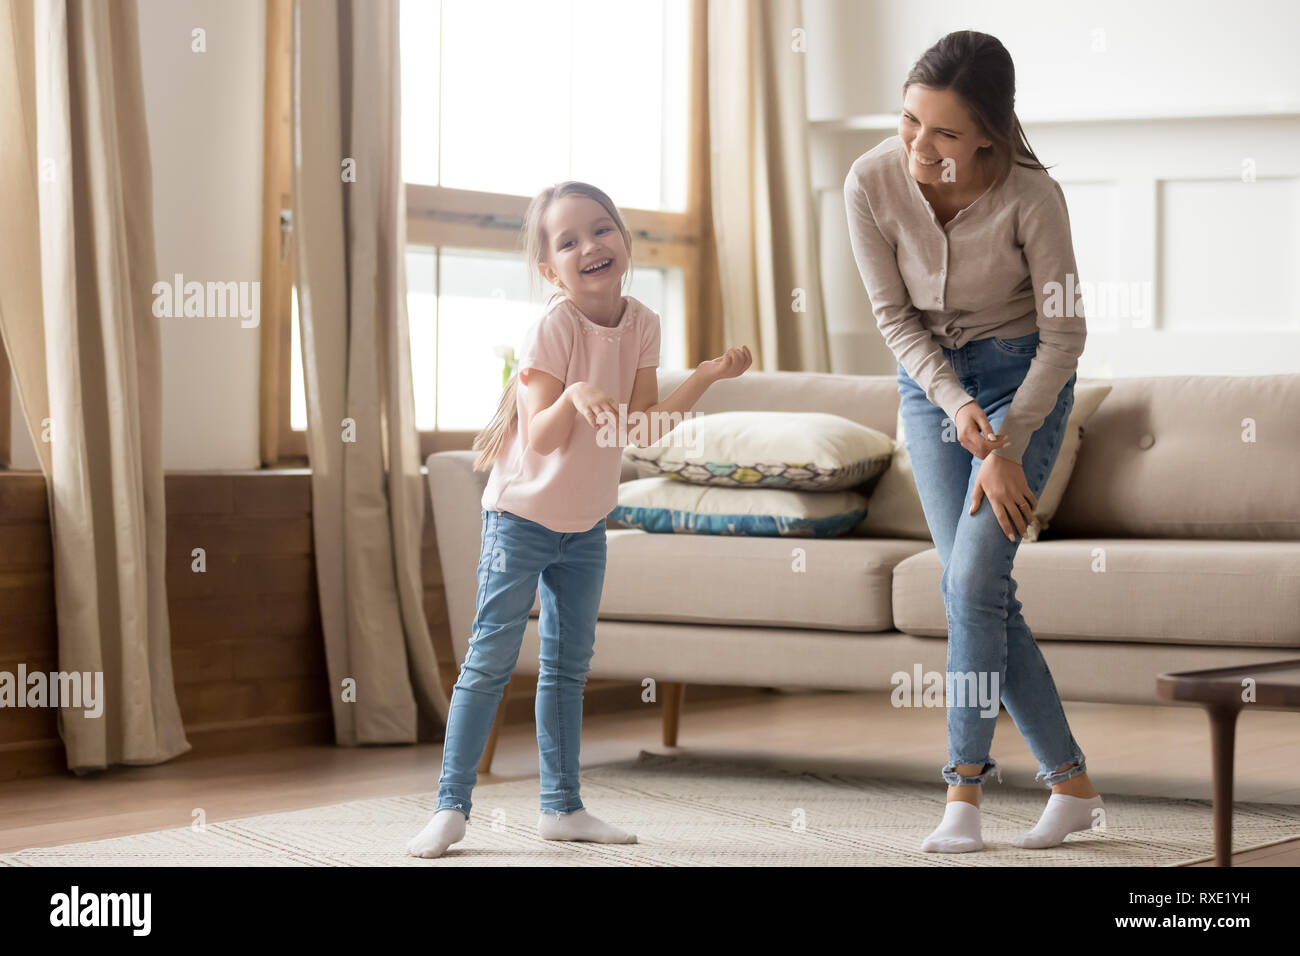 Happy playful cute child daughter laughing dancing with young mom Stock Photo